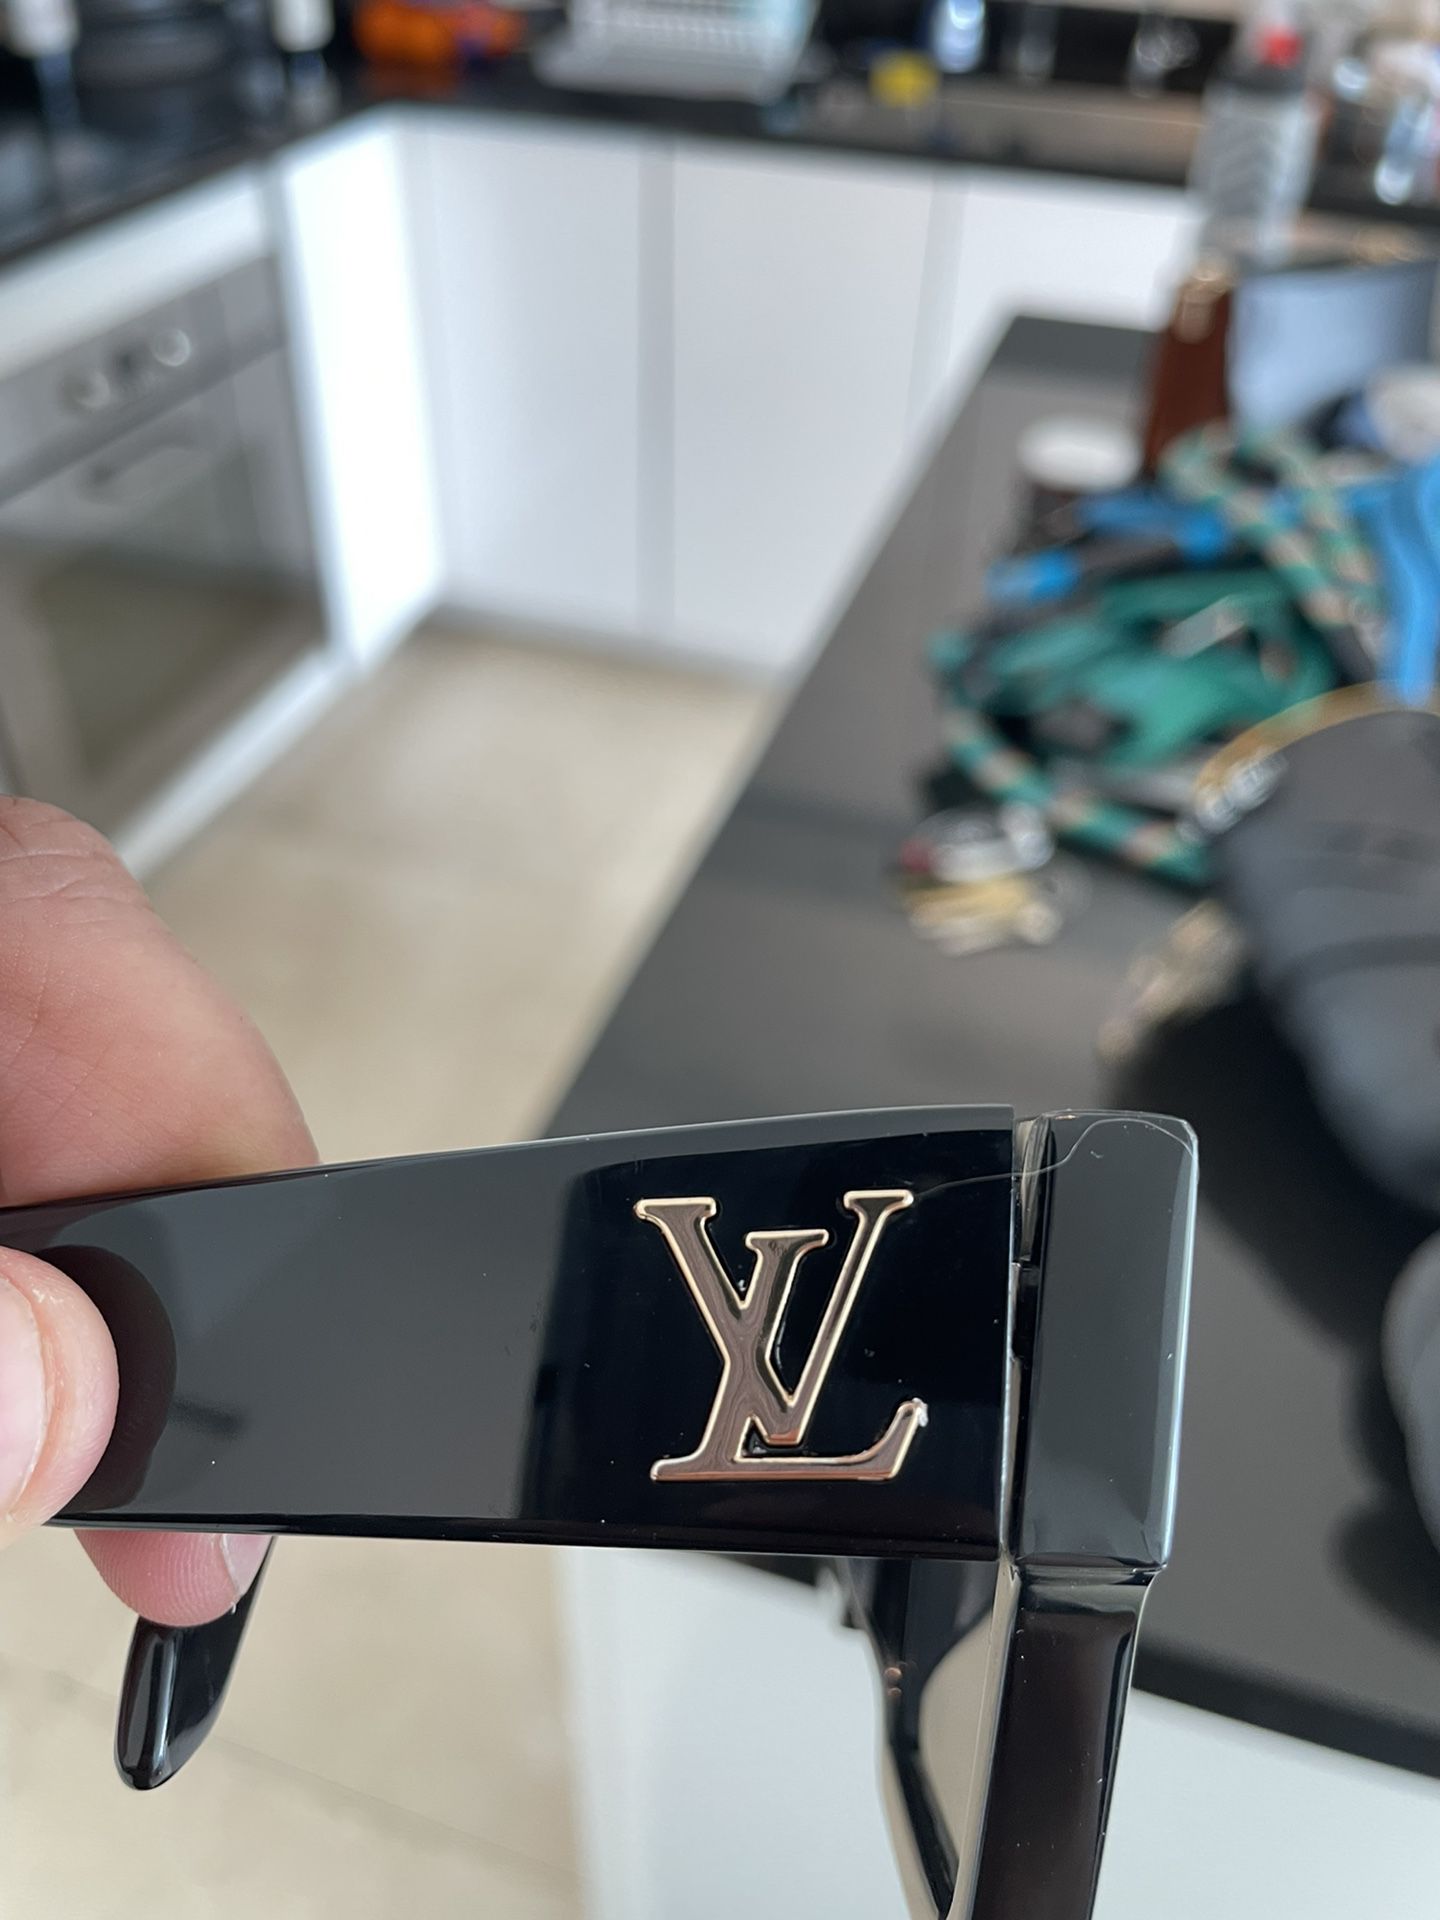 Louis Vuitton Sunglasses Cyclone for Sale in Grandview, MO - OfferUp